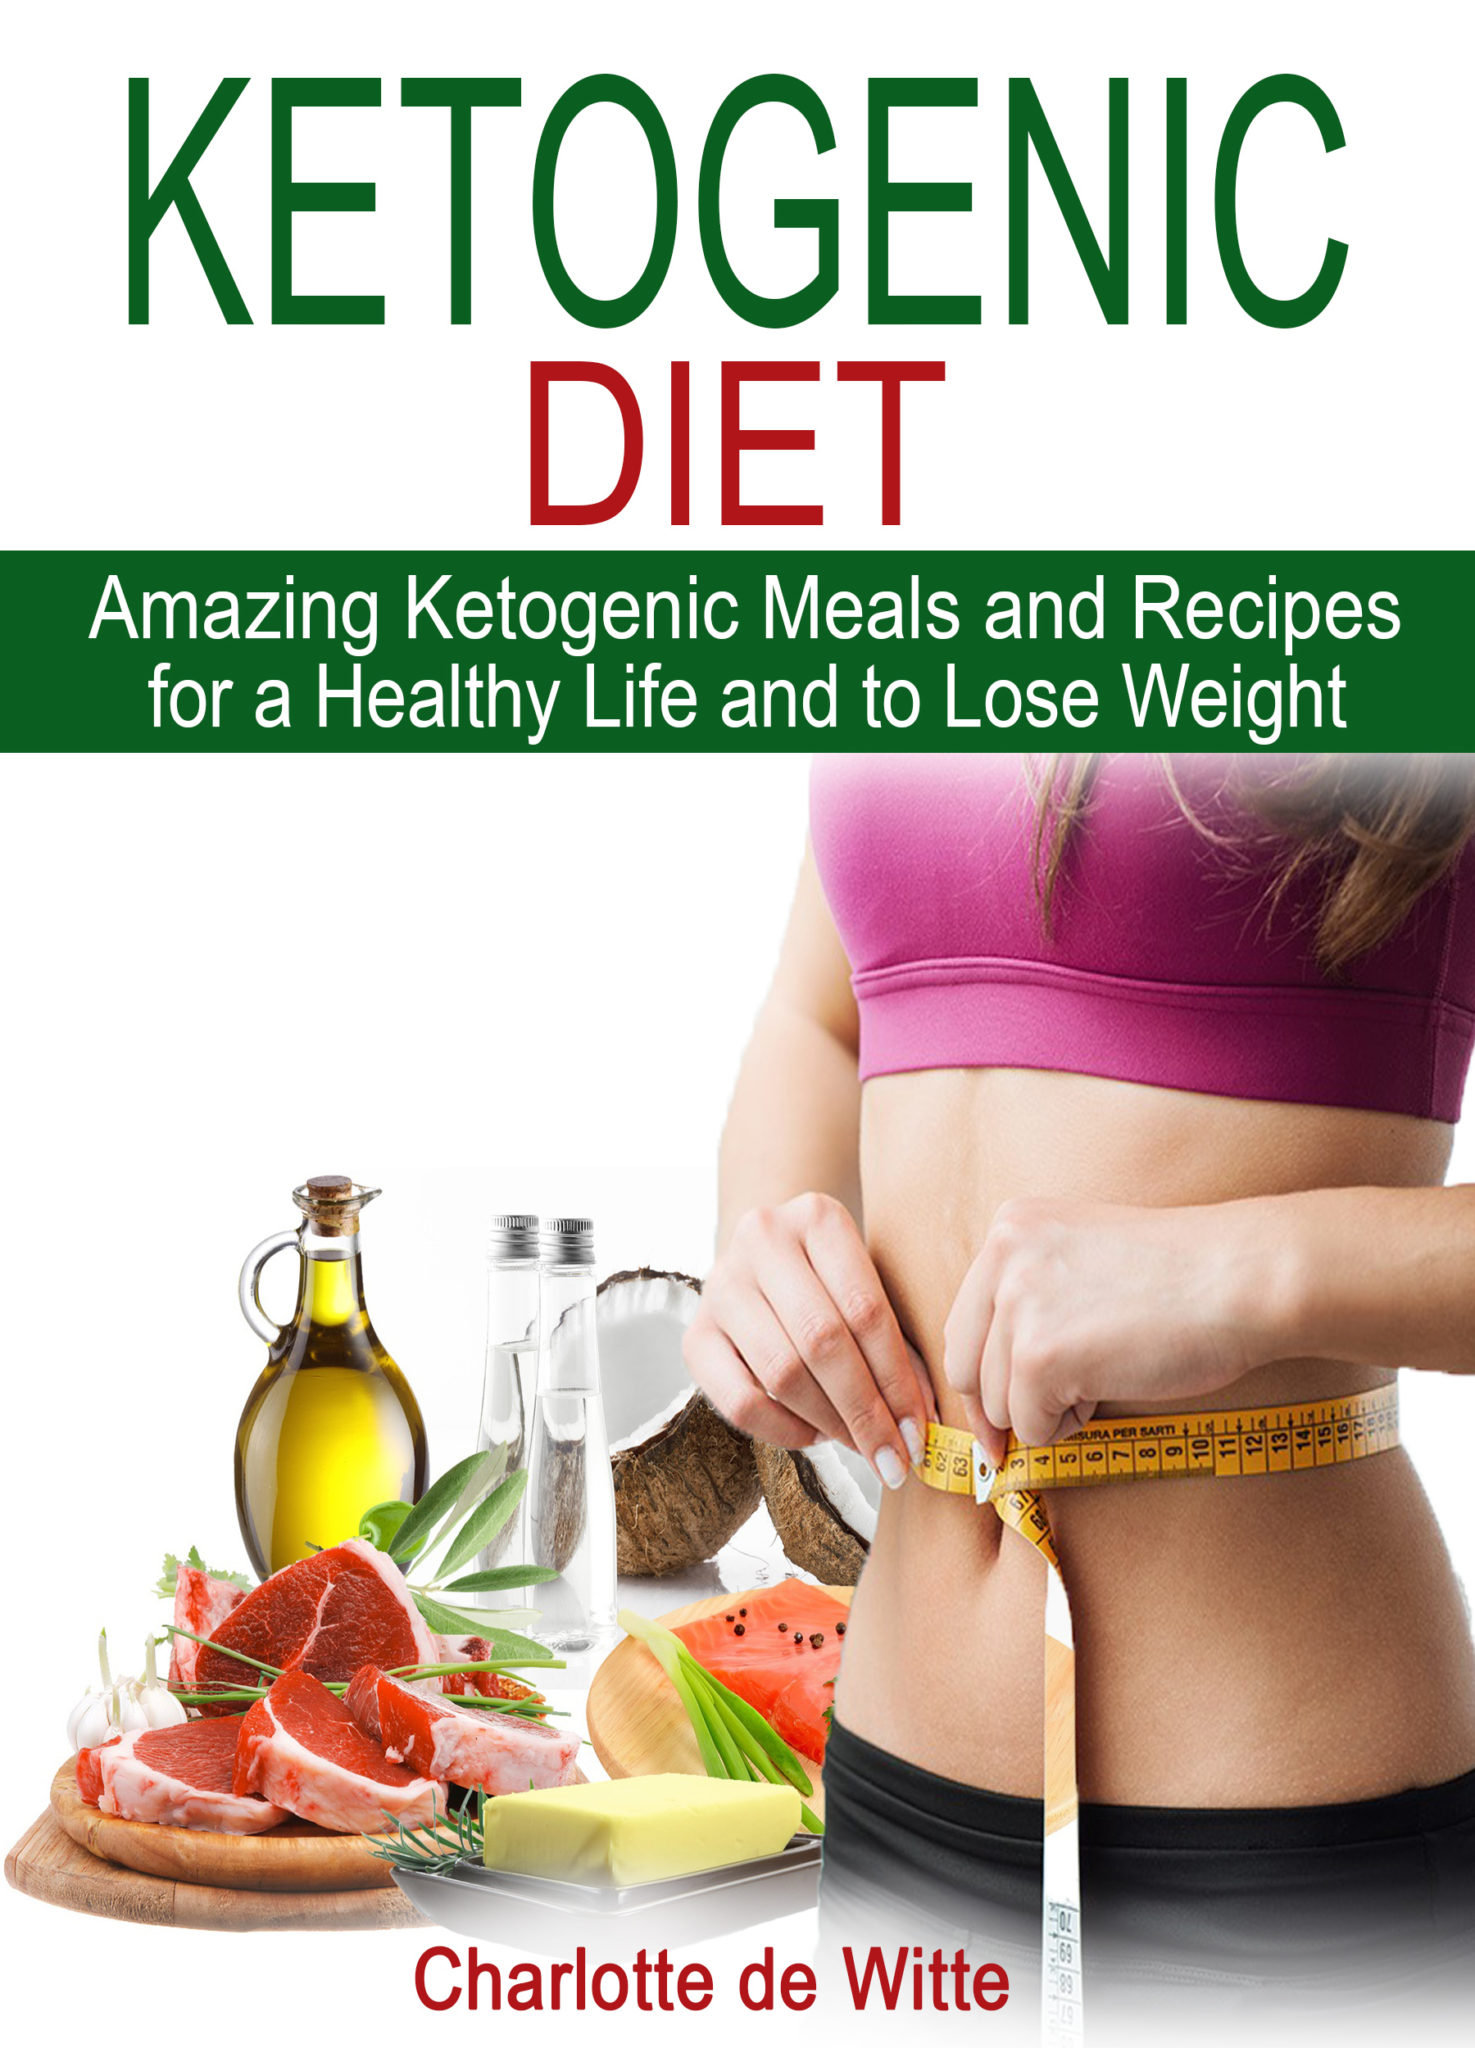 FREE: KETOGENIC DIET: Amazing Ketogenic Meals and Recipes for a Healthy Life and to Lose Weight by Charlotte de Witte